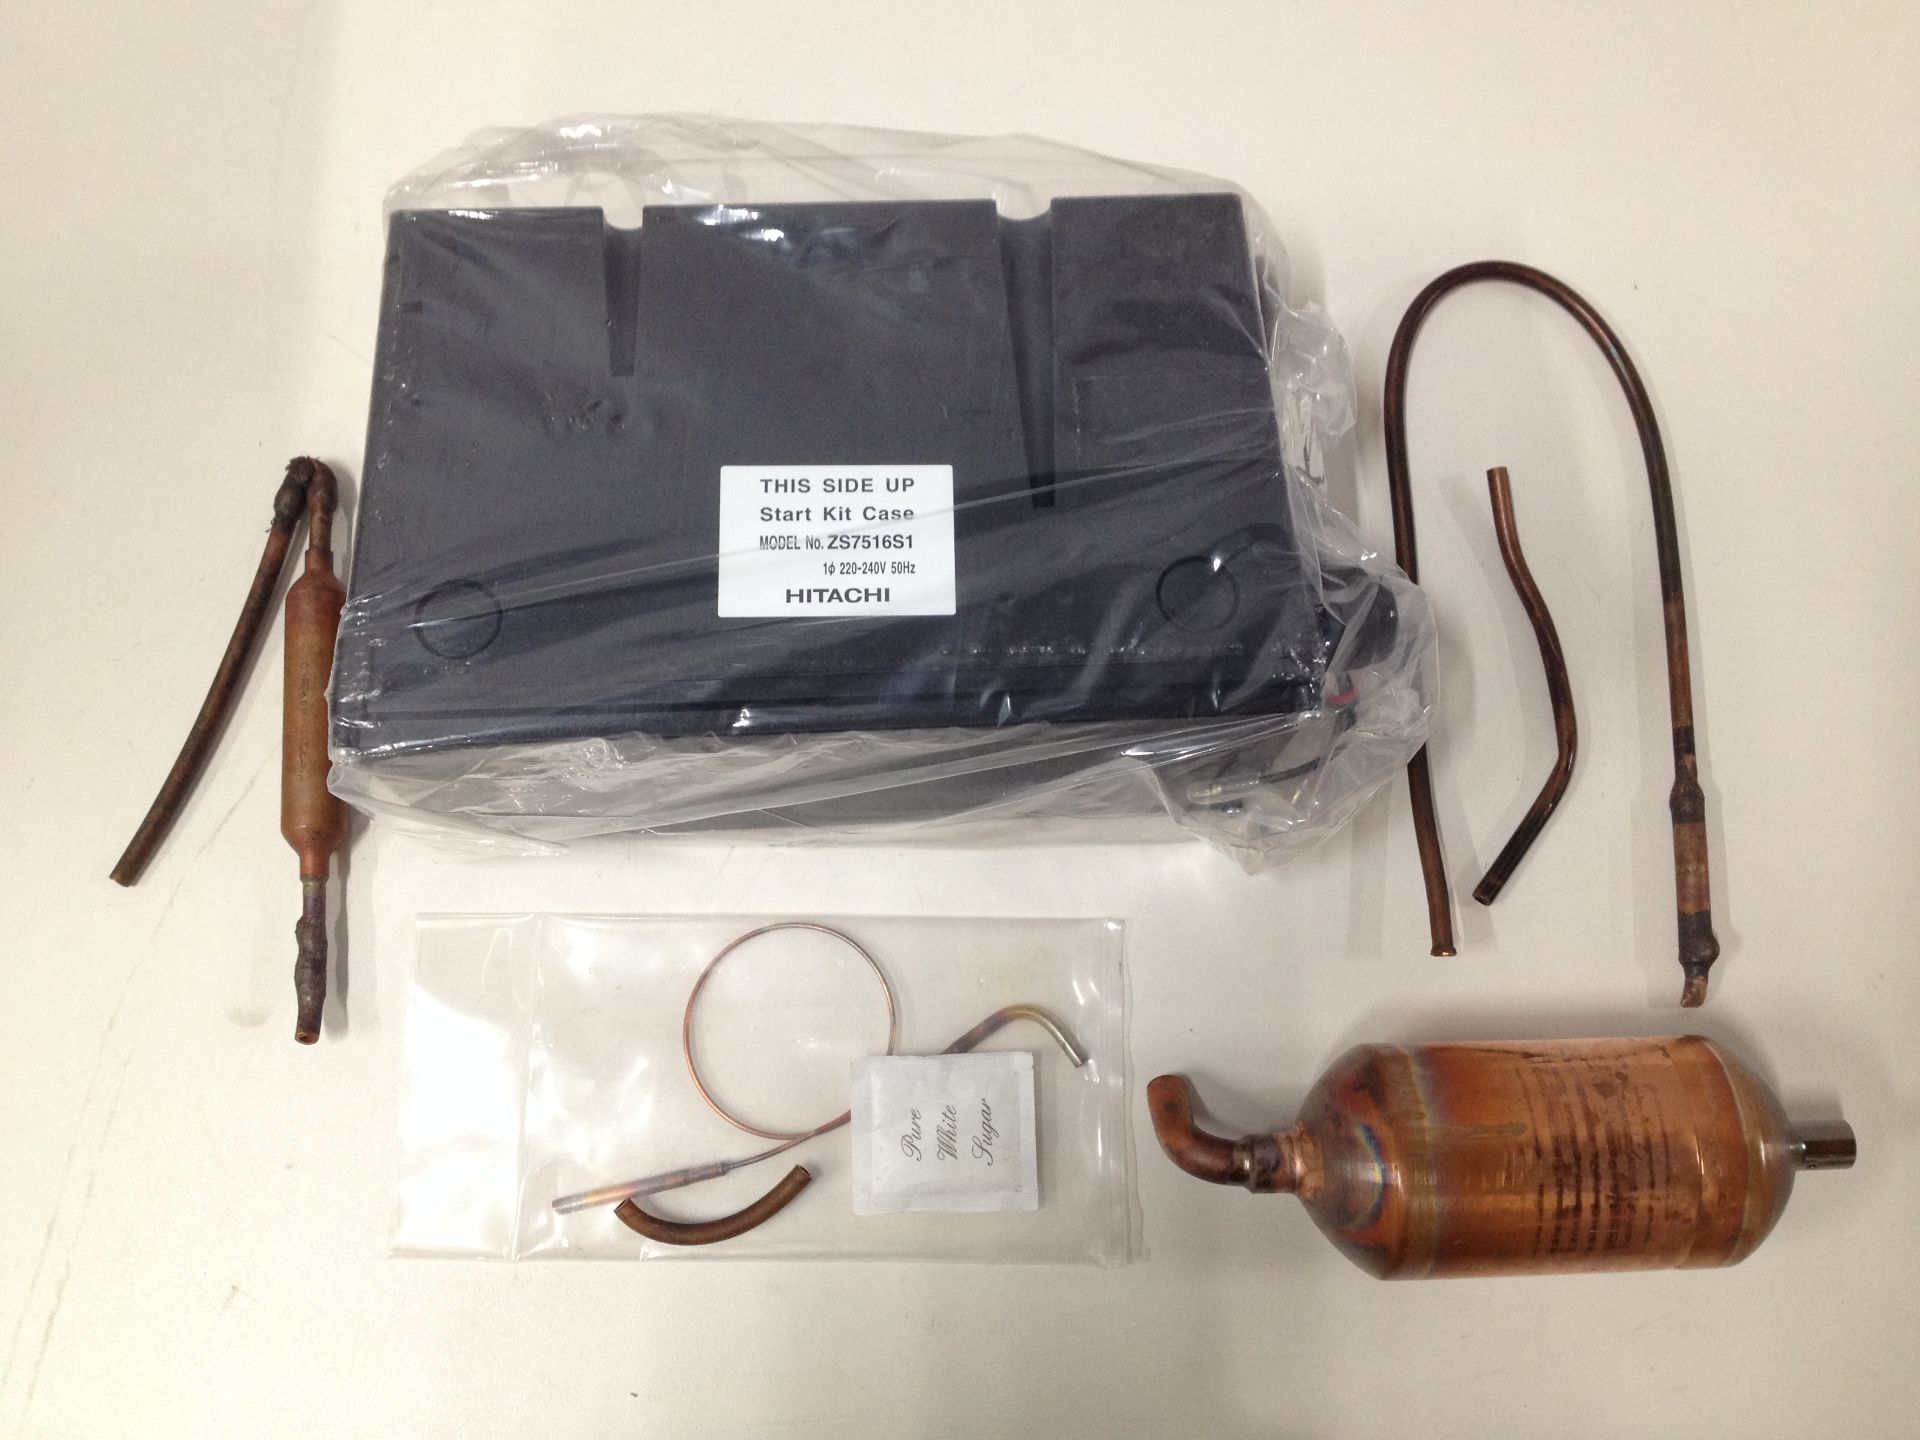 3 x Hitachi Accessories for Compressor; Start Kit Cases - Image 2 of 5